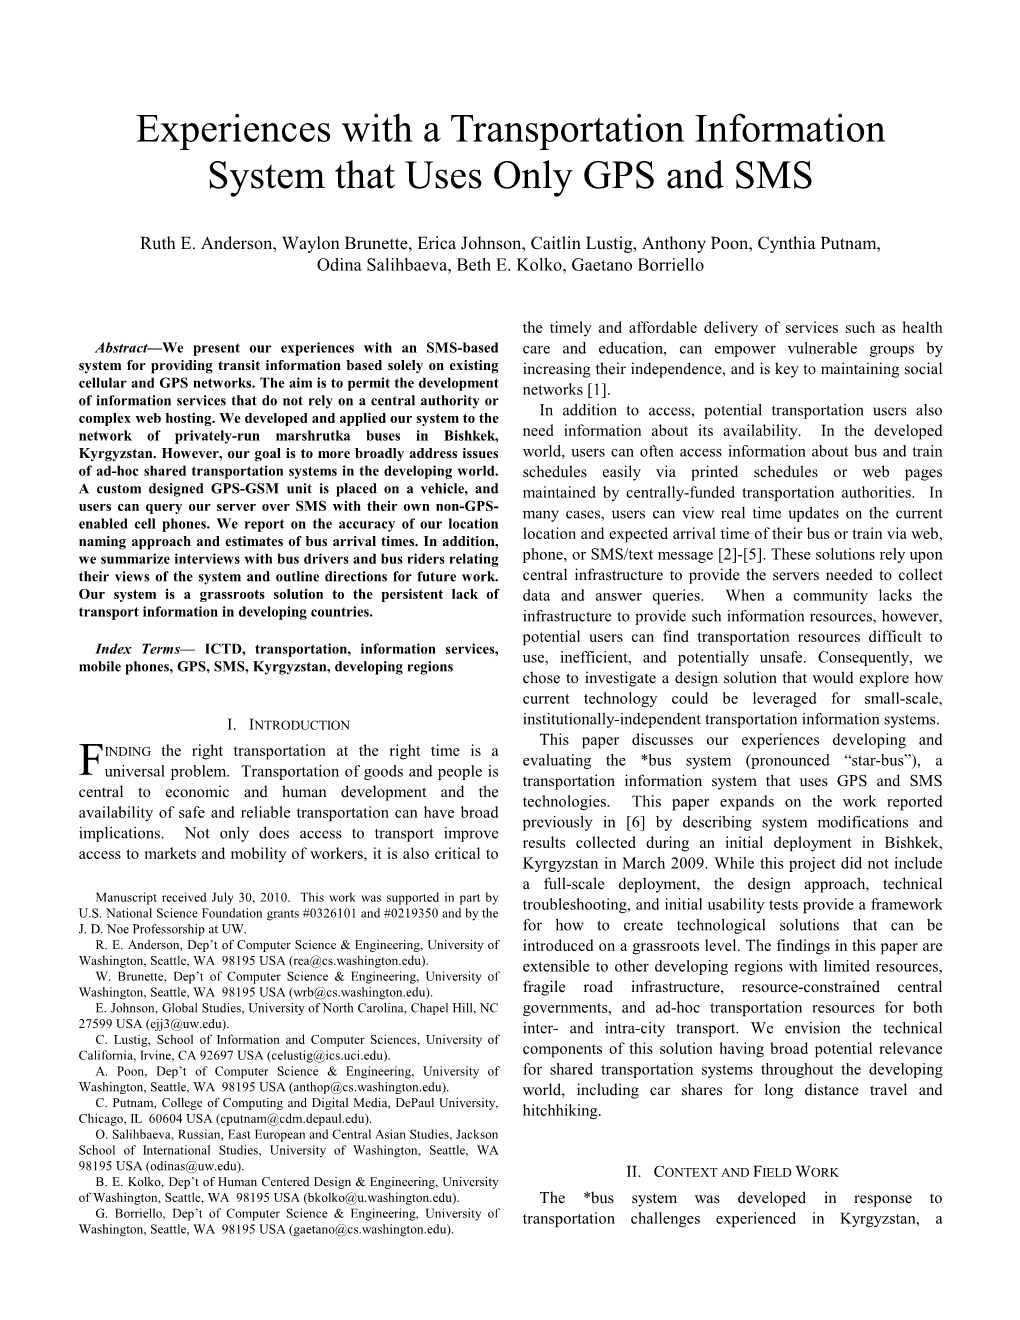 Experiences with a Transportation Information System That Uses Only GPS and SMS